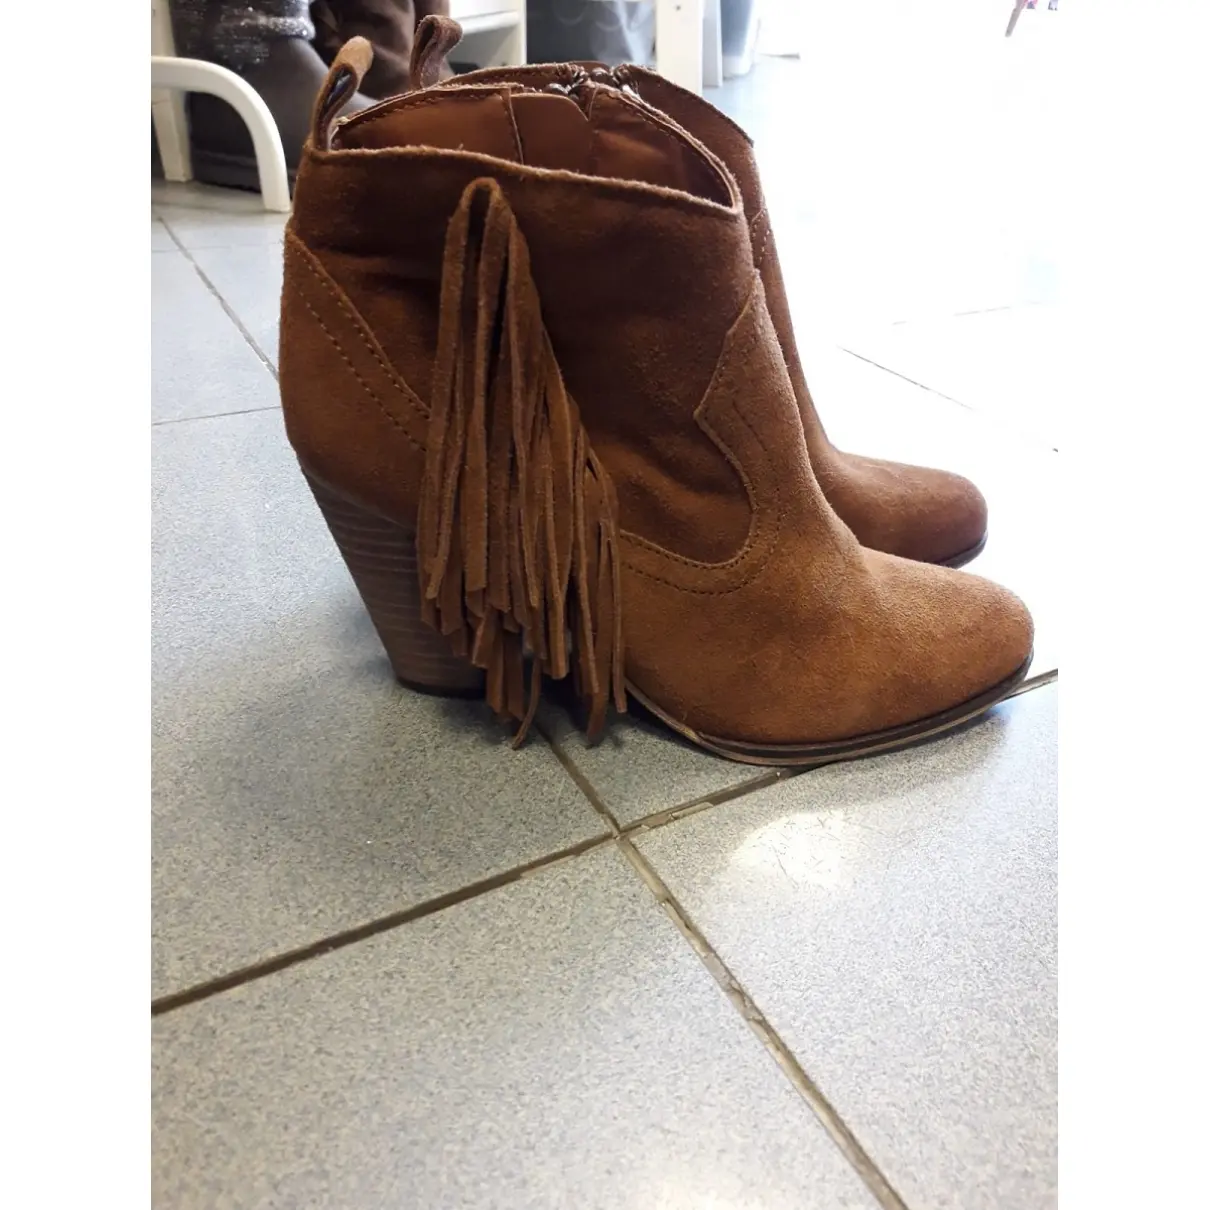 Steve Madden Western boots for sale